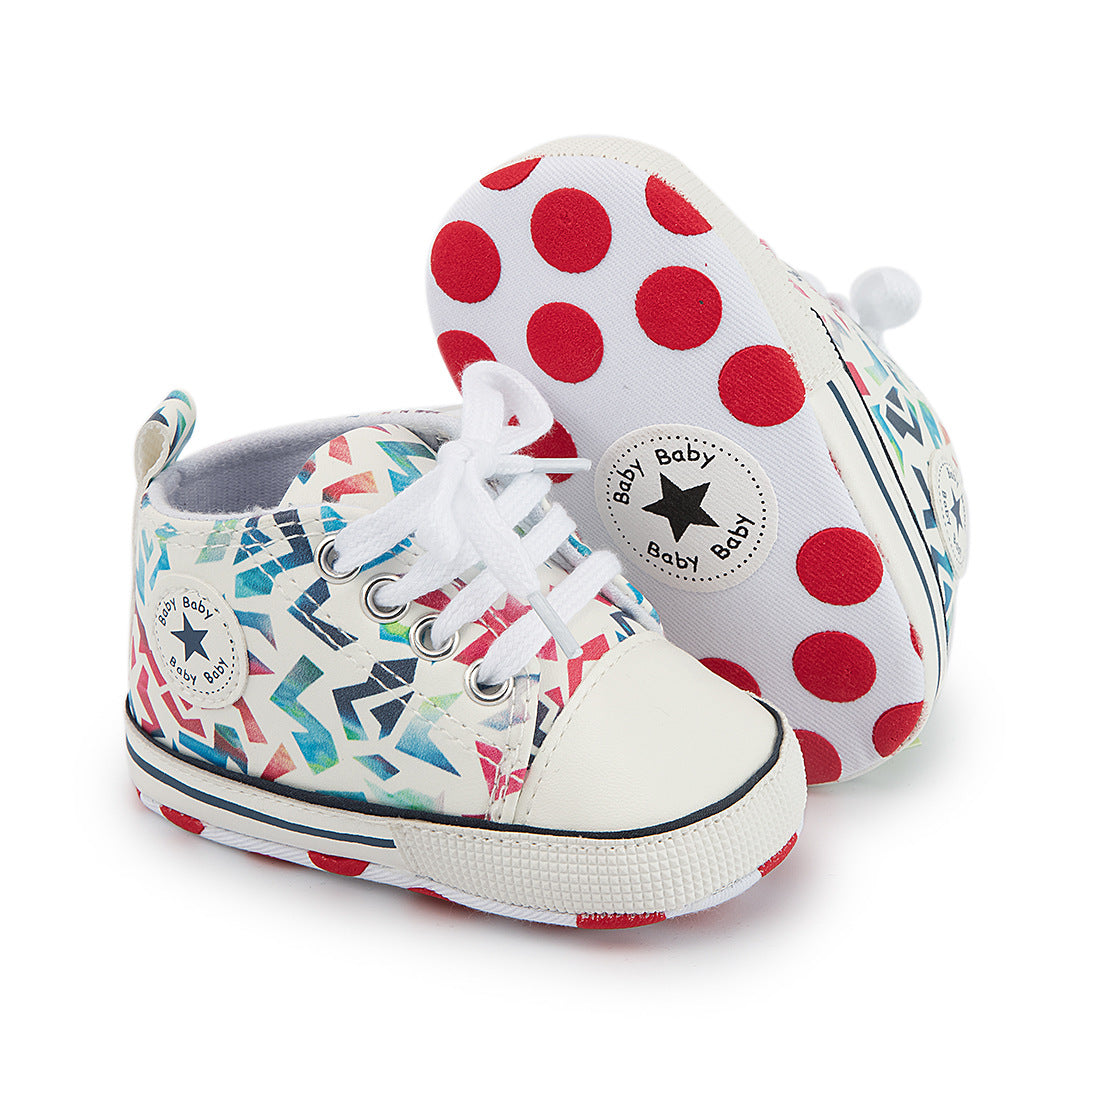 Baby Color Graffiti Baby Canvas Soft Sole Toddler Shoes